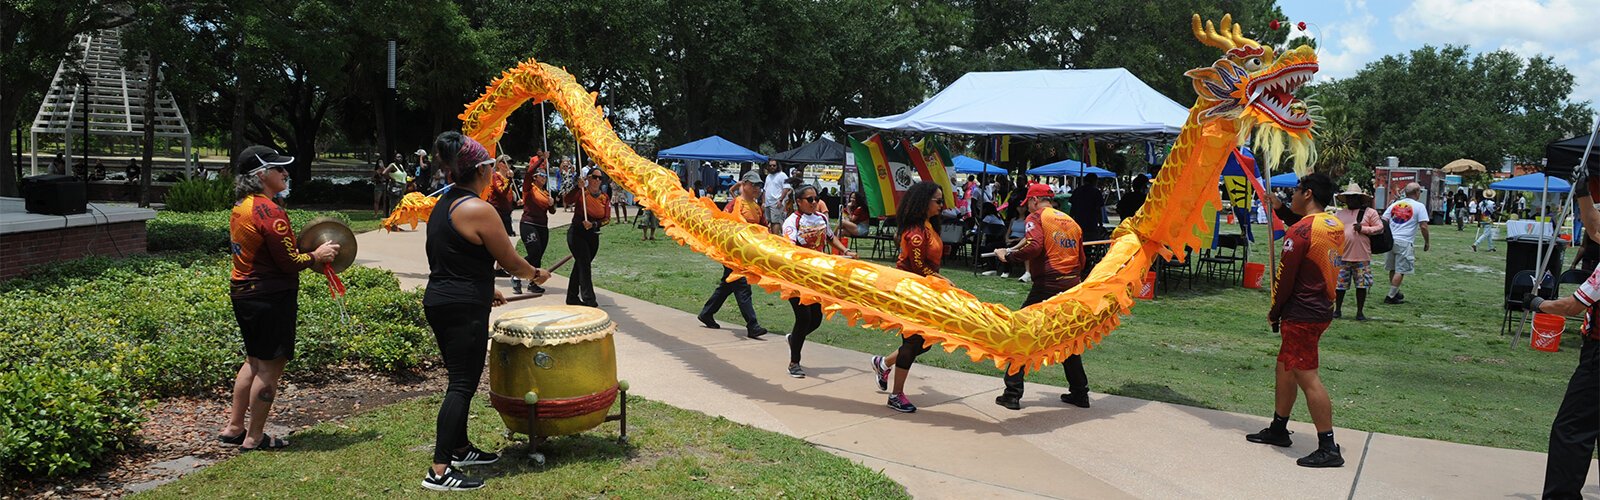 Accompanied by Taggu drumming, dragon dancers wind their way through Water Works Park in Tampa at the annual Multicultural Family Day event on Sunday.